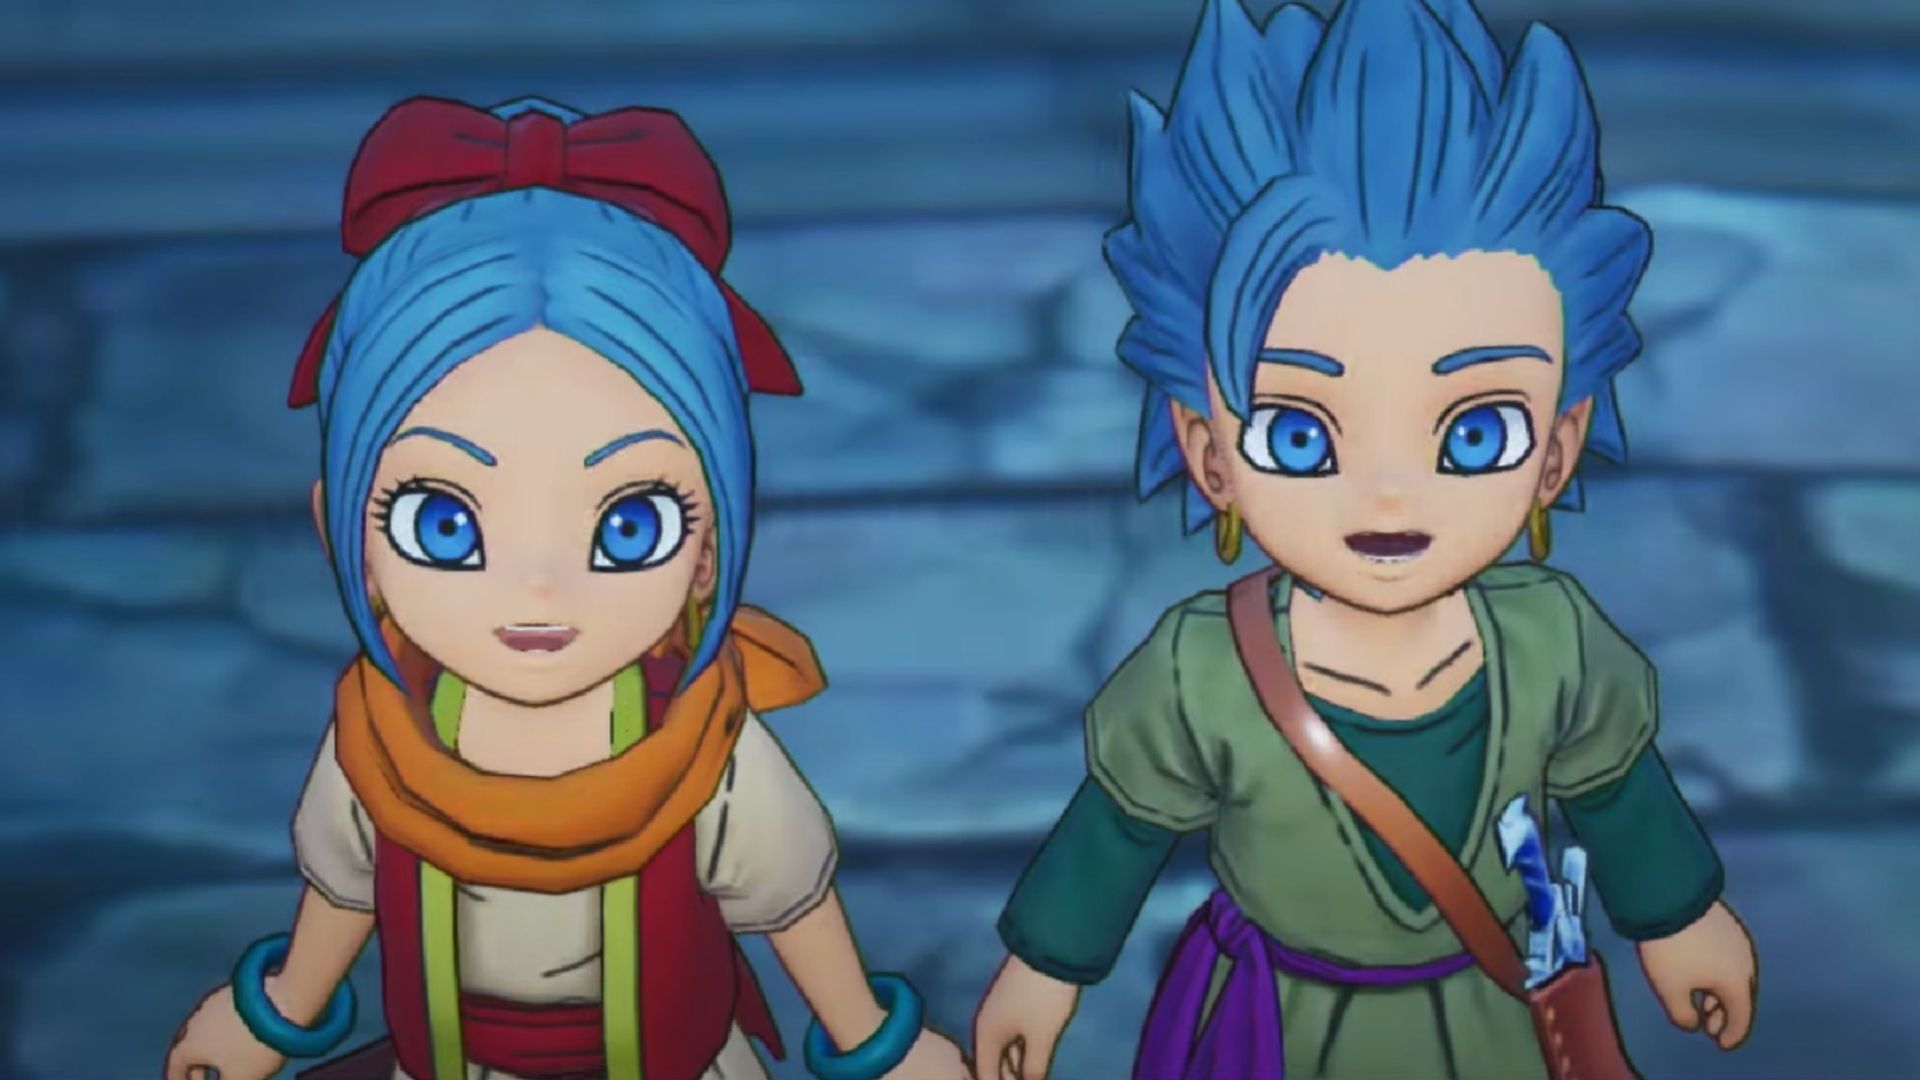 Dragon Quest Treasures shows off monster-catching
gameplay